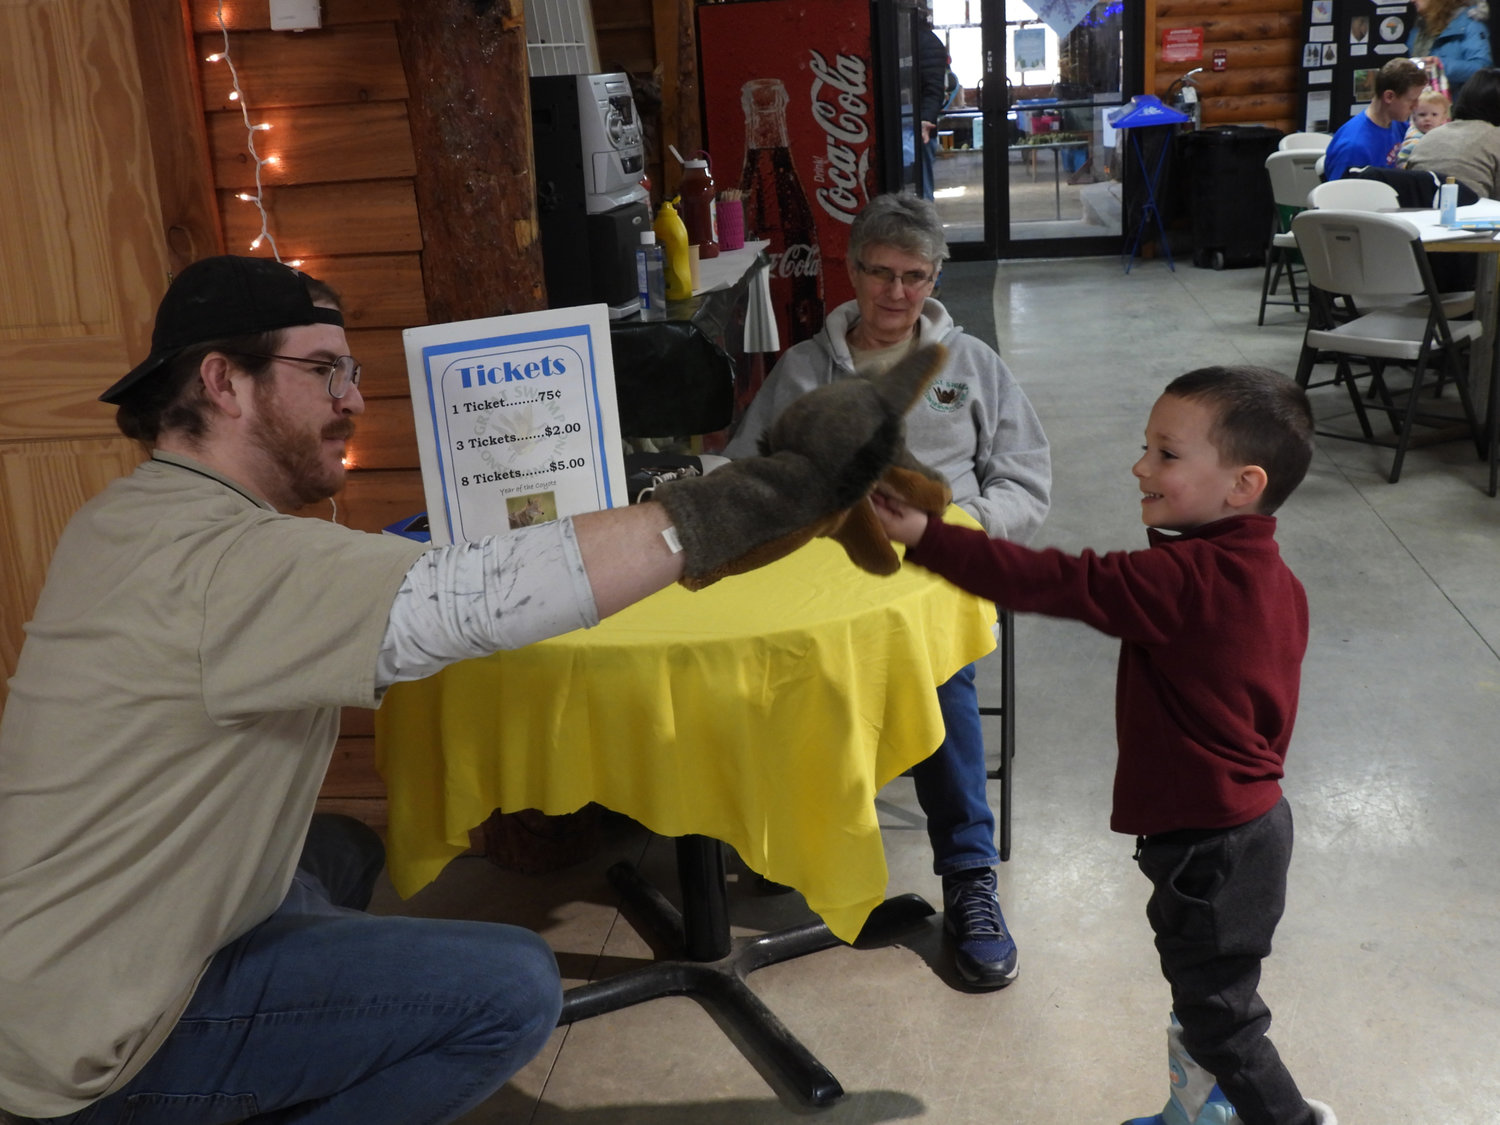 GSC Environmental Educator Jack Silky makes a child smile at the Great Swamp Conservancy's Winter Hibernation Festival on Saturday, Feb, 18